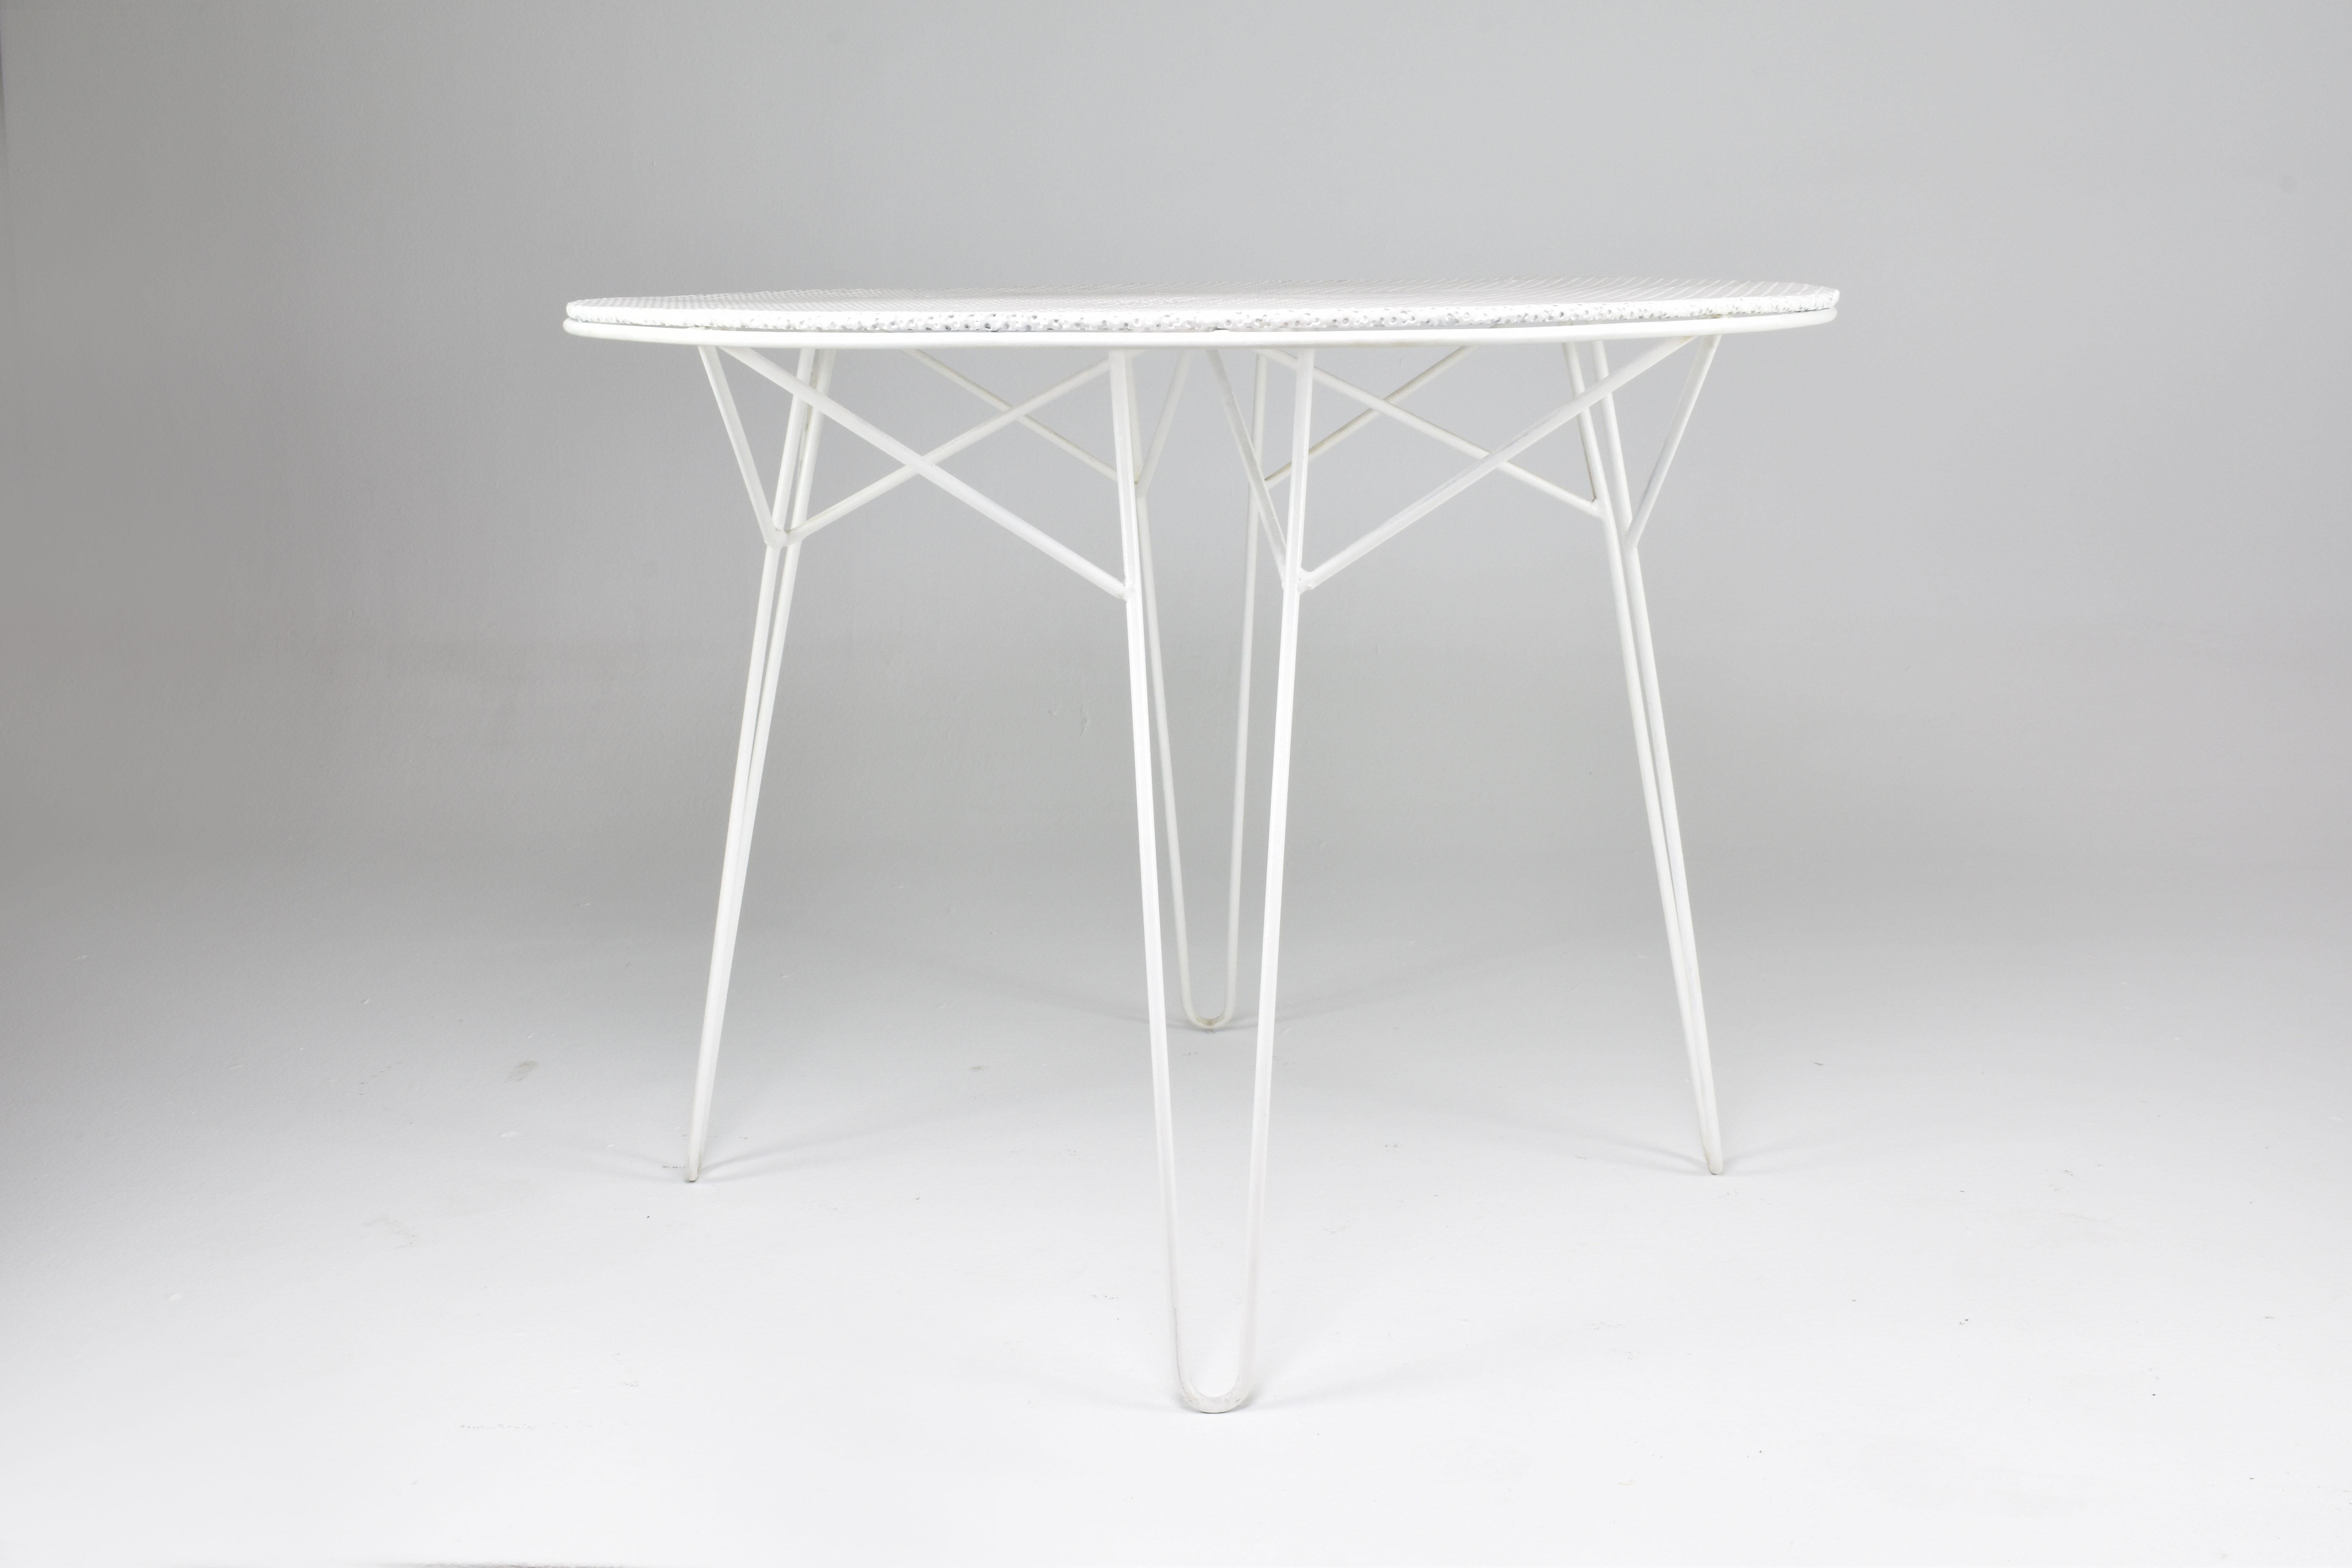 A stunning circular garden table attributed to the iconic French mid-century designer Mathieu. This collectible piece is made of his signature perforated sheet and white tubular lacquered steel.
France. Circa 1950's. 
A similar circular table is